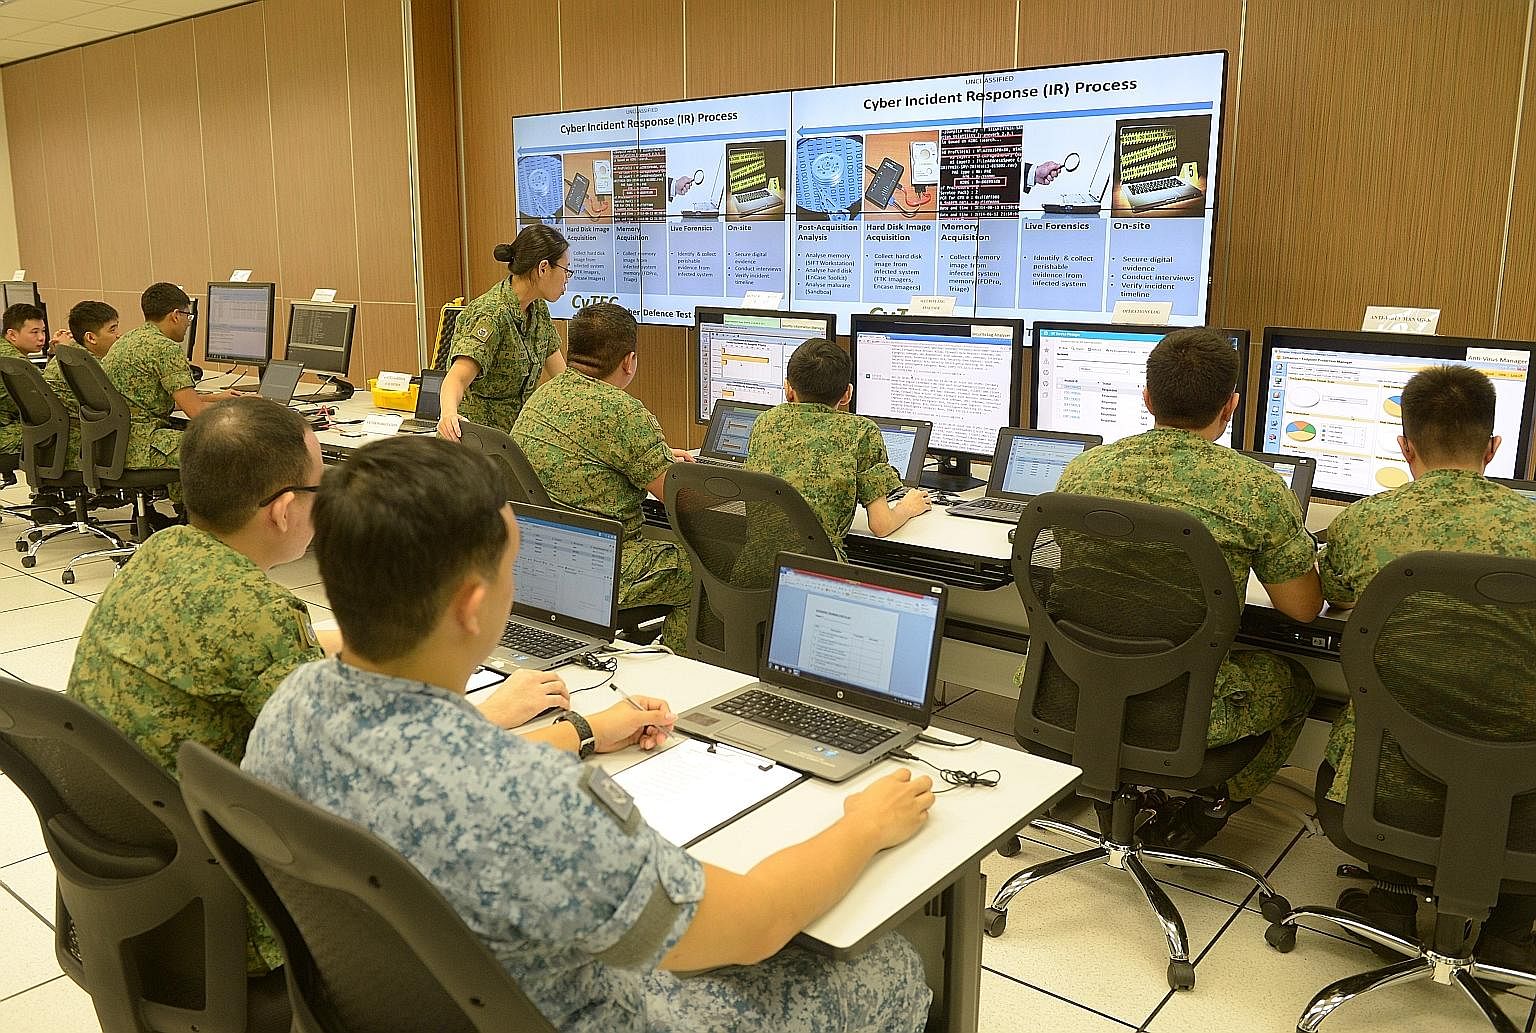 Soldiers at a demonstration yesterday to show how they would handle cyber threats at the Cyber Defence Test and Evaluation Centre, a cyber "live-firing range" located at Stagmont Camp.